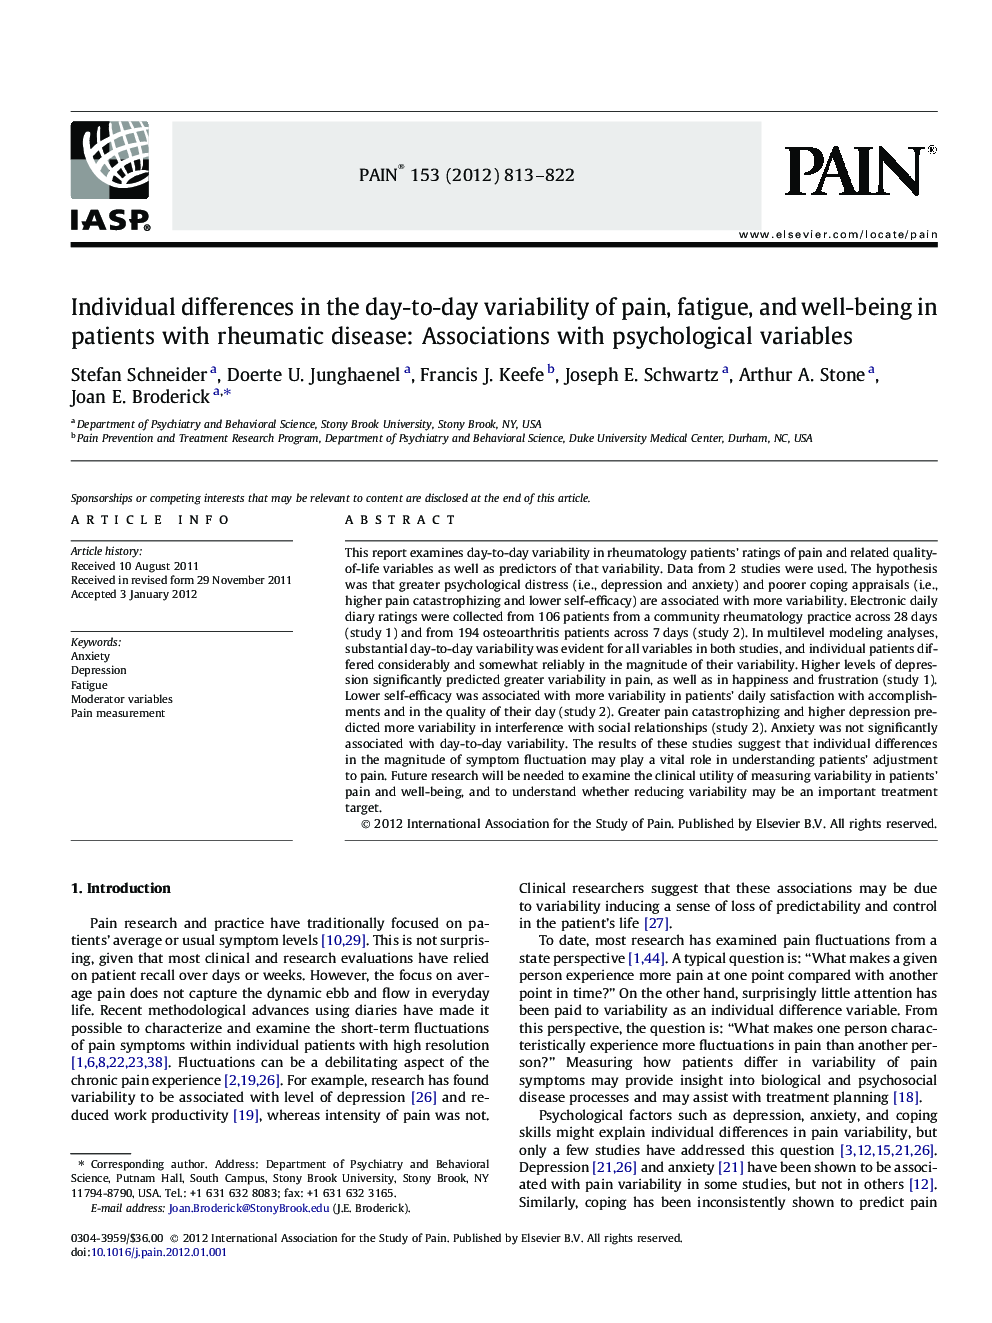 Individual differences in the day-to-day variability of pain, fatigue, and well-being in patients with rheumatic disease: Associations with psychological variables